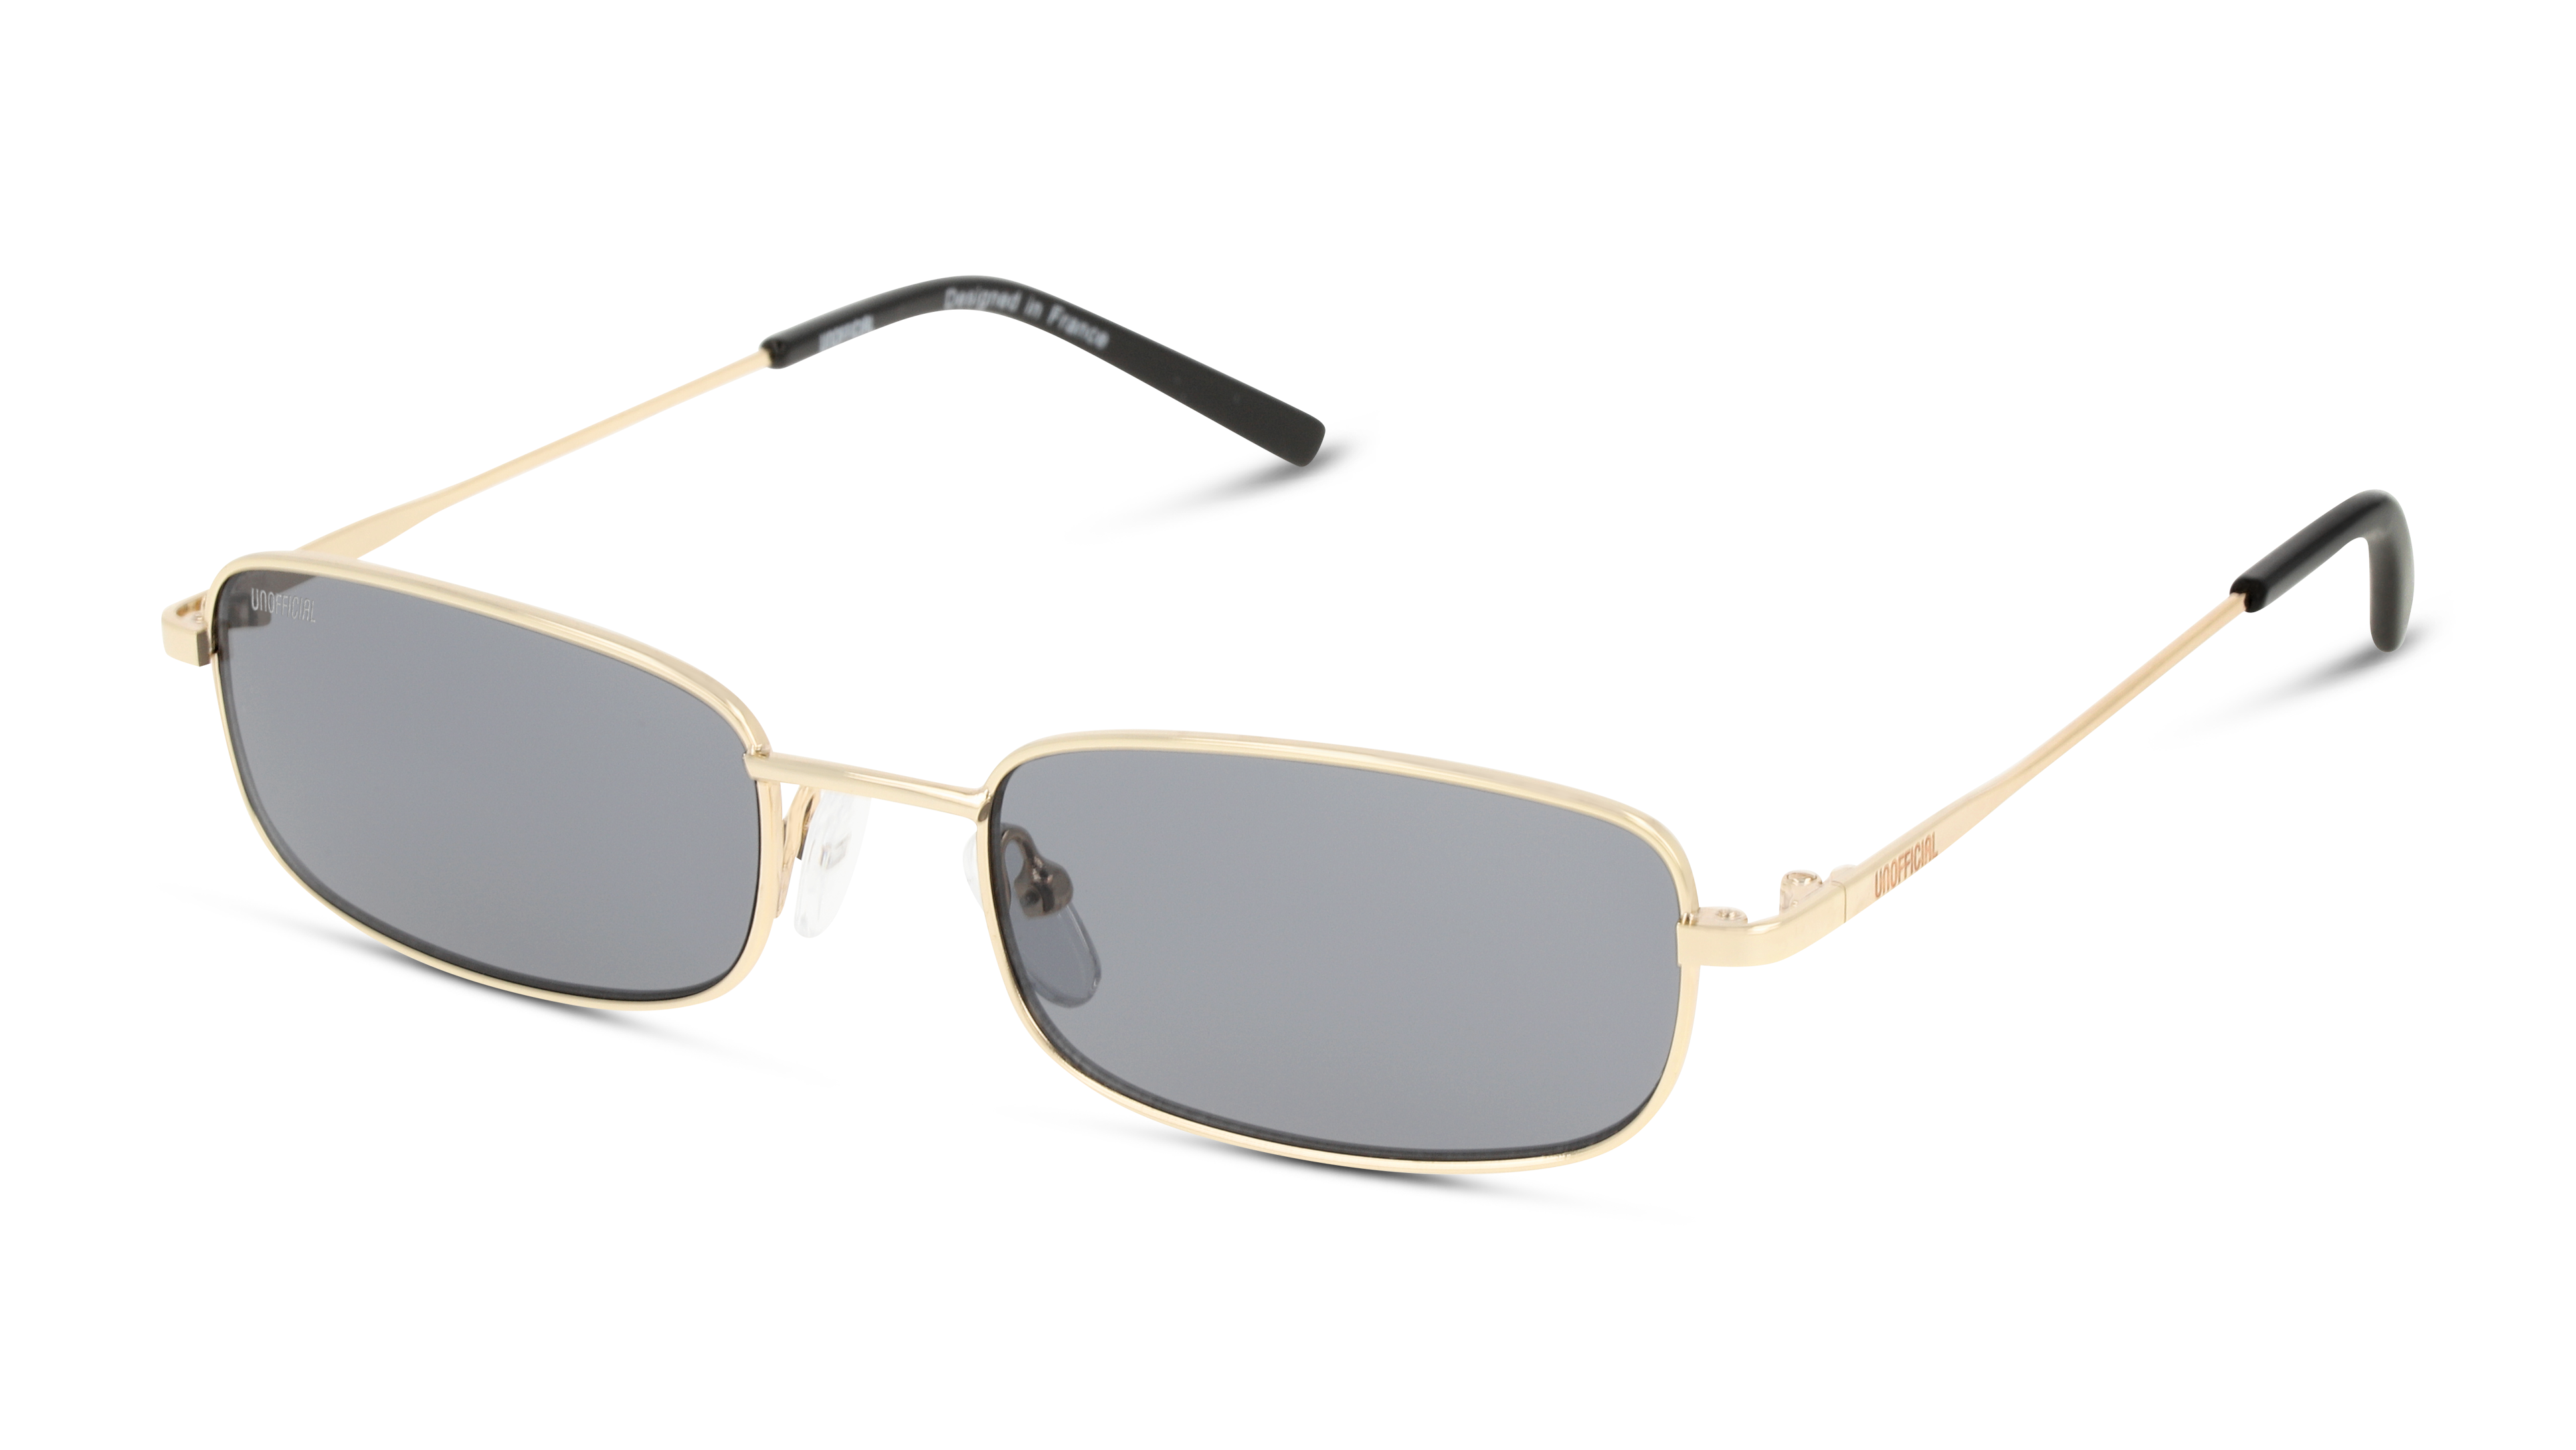 Angle_Left01 Unofficial UNSU0087 (DDG0) Sunglasses Grey / Gold